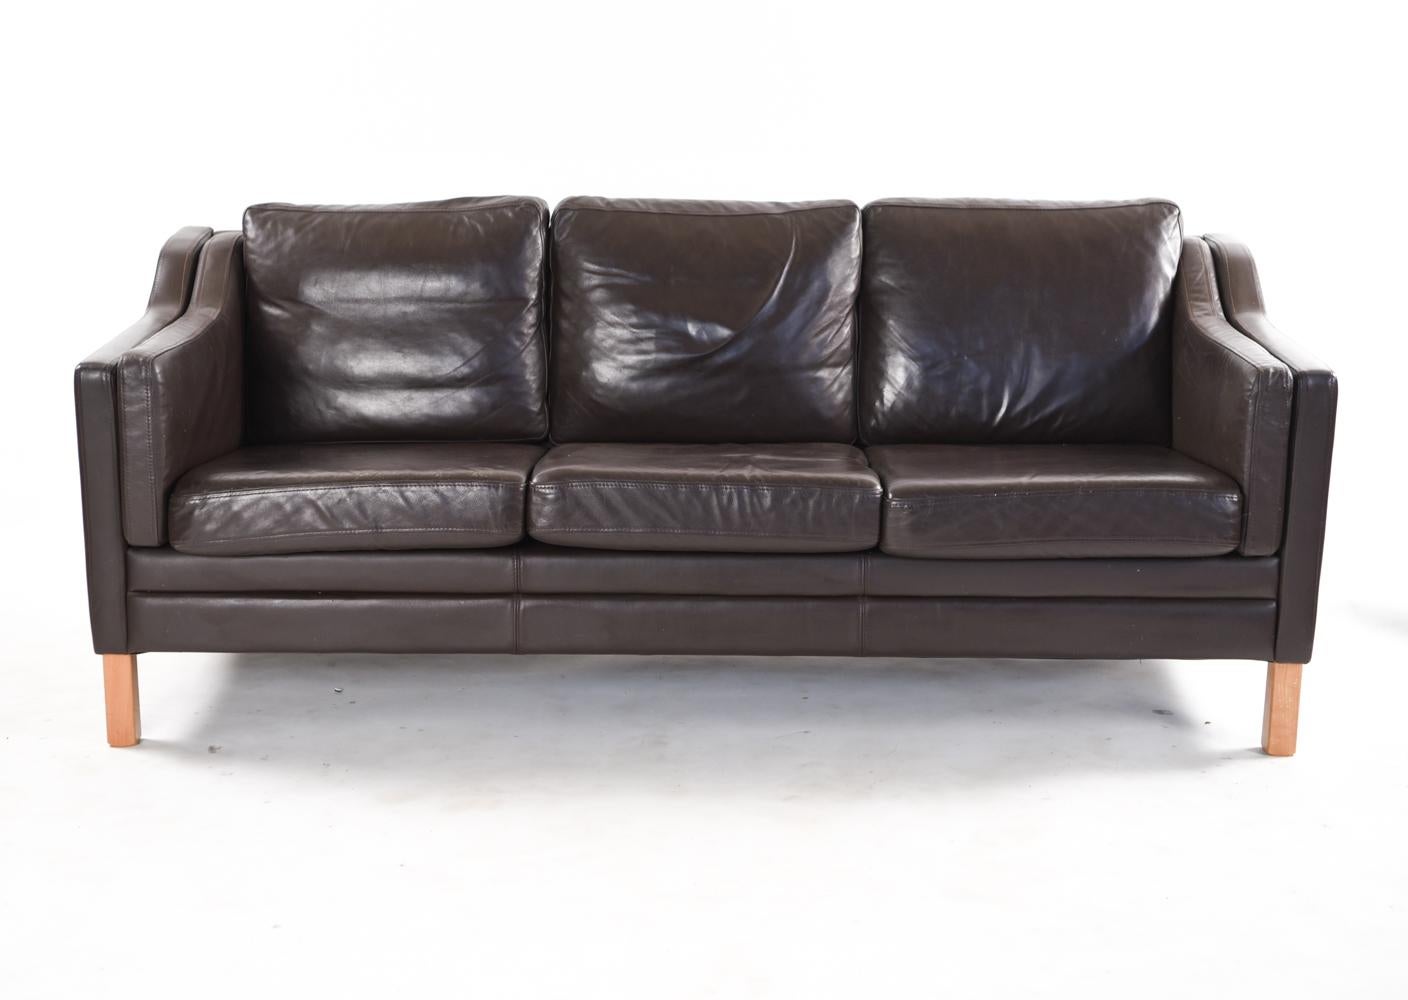 A Danish midcentury three-seat sofa in the manner of designer Børge Mogensen. Upholstered in rich, chocolate brown leather, this sofa displays an attractive patina only possible from genuine age. A timeless, sought after Scandinavian Modern design.